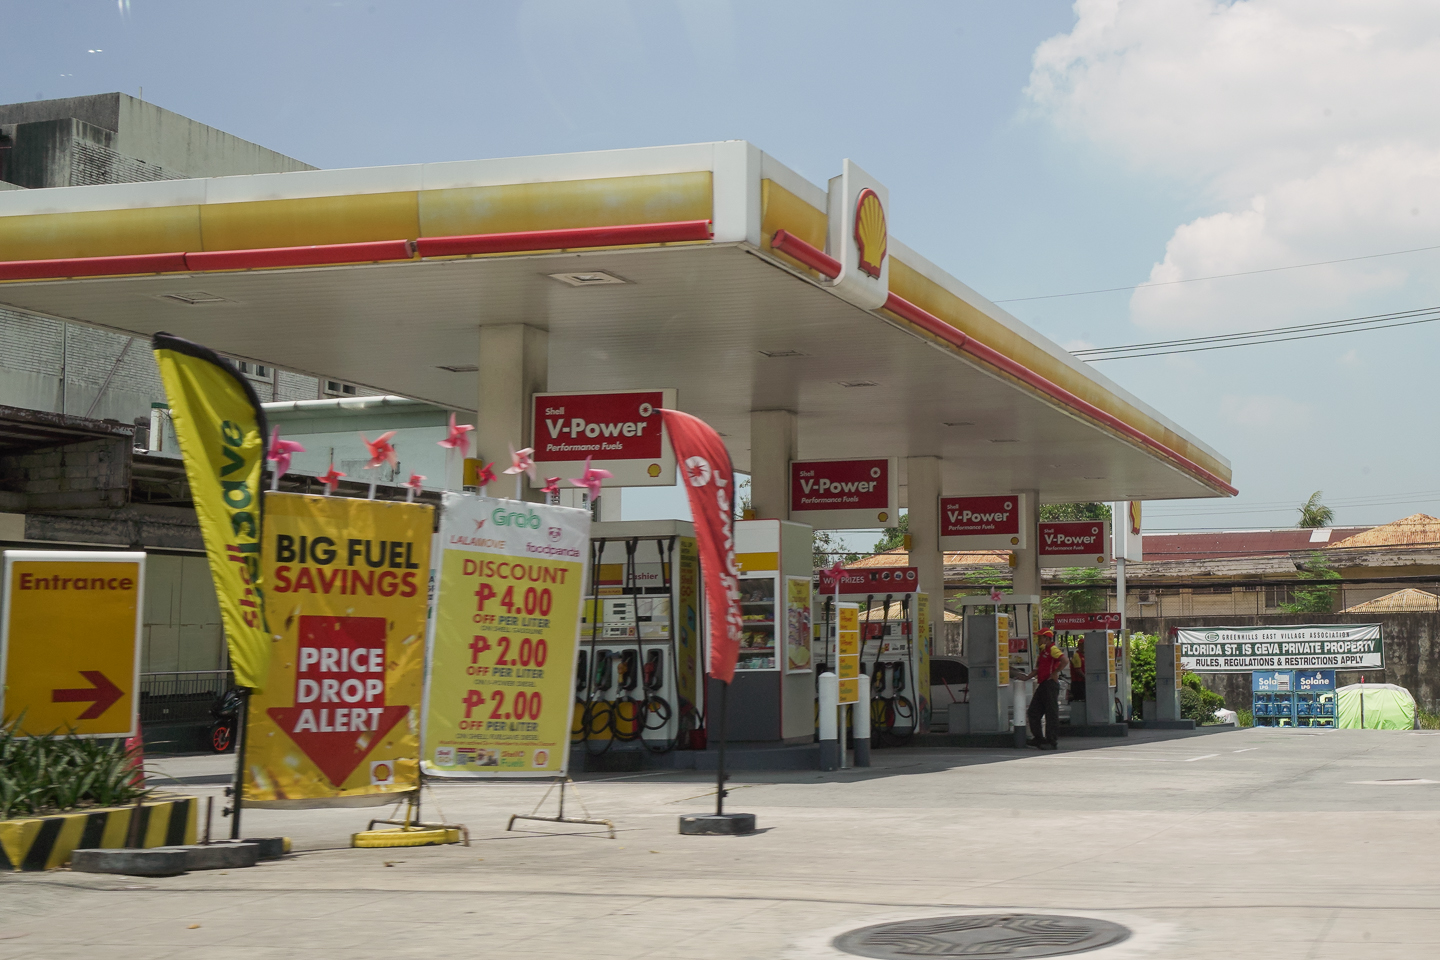 2022 PH Fuel Discounts: Your ultimate guide on who can get them, where, and how